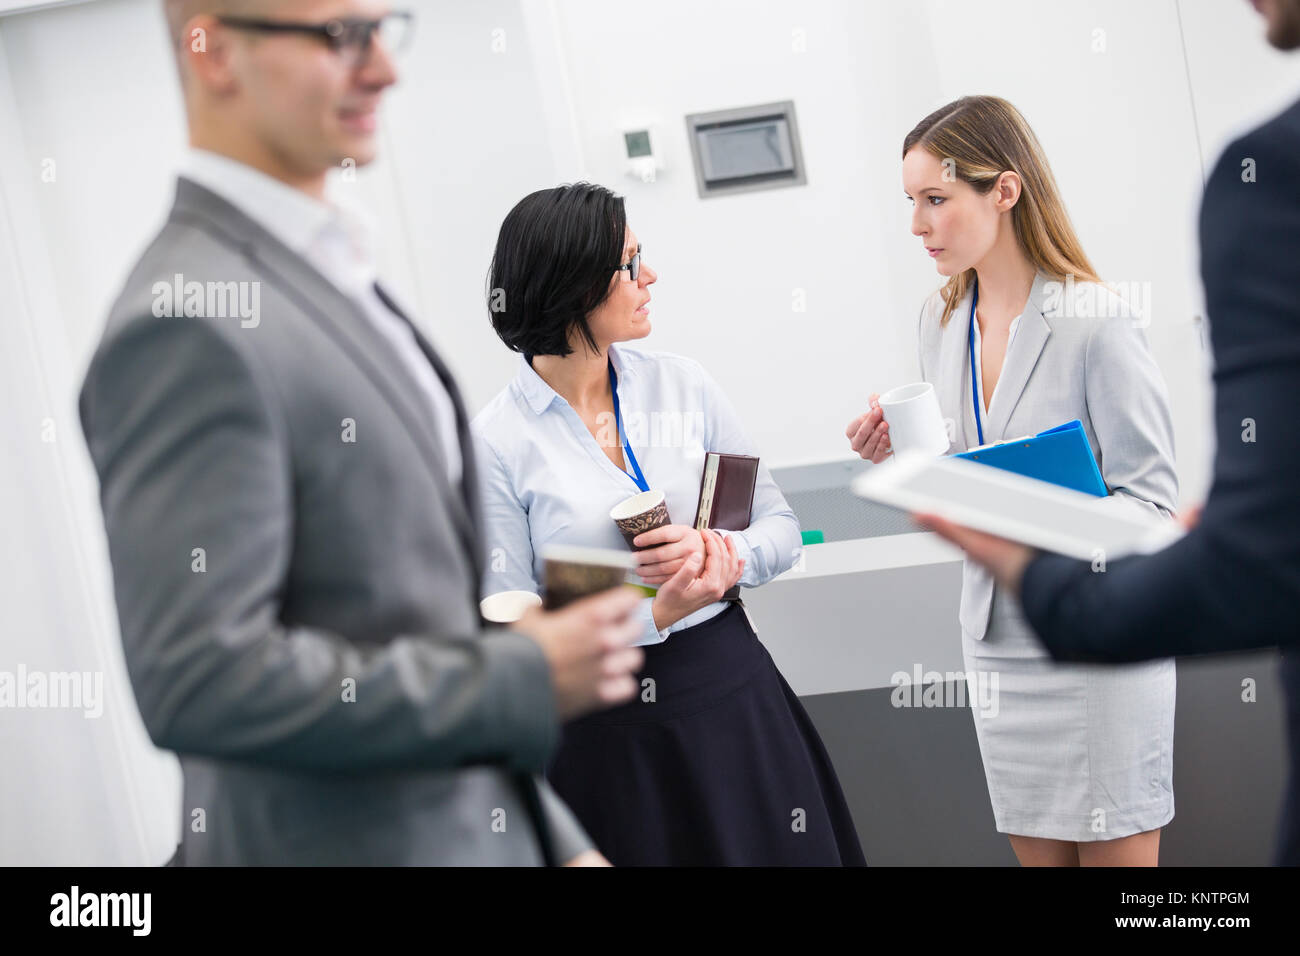 Female professionals communicating while standing in seminar hall Stock Photo